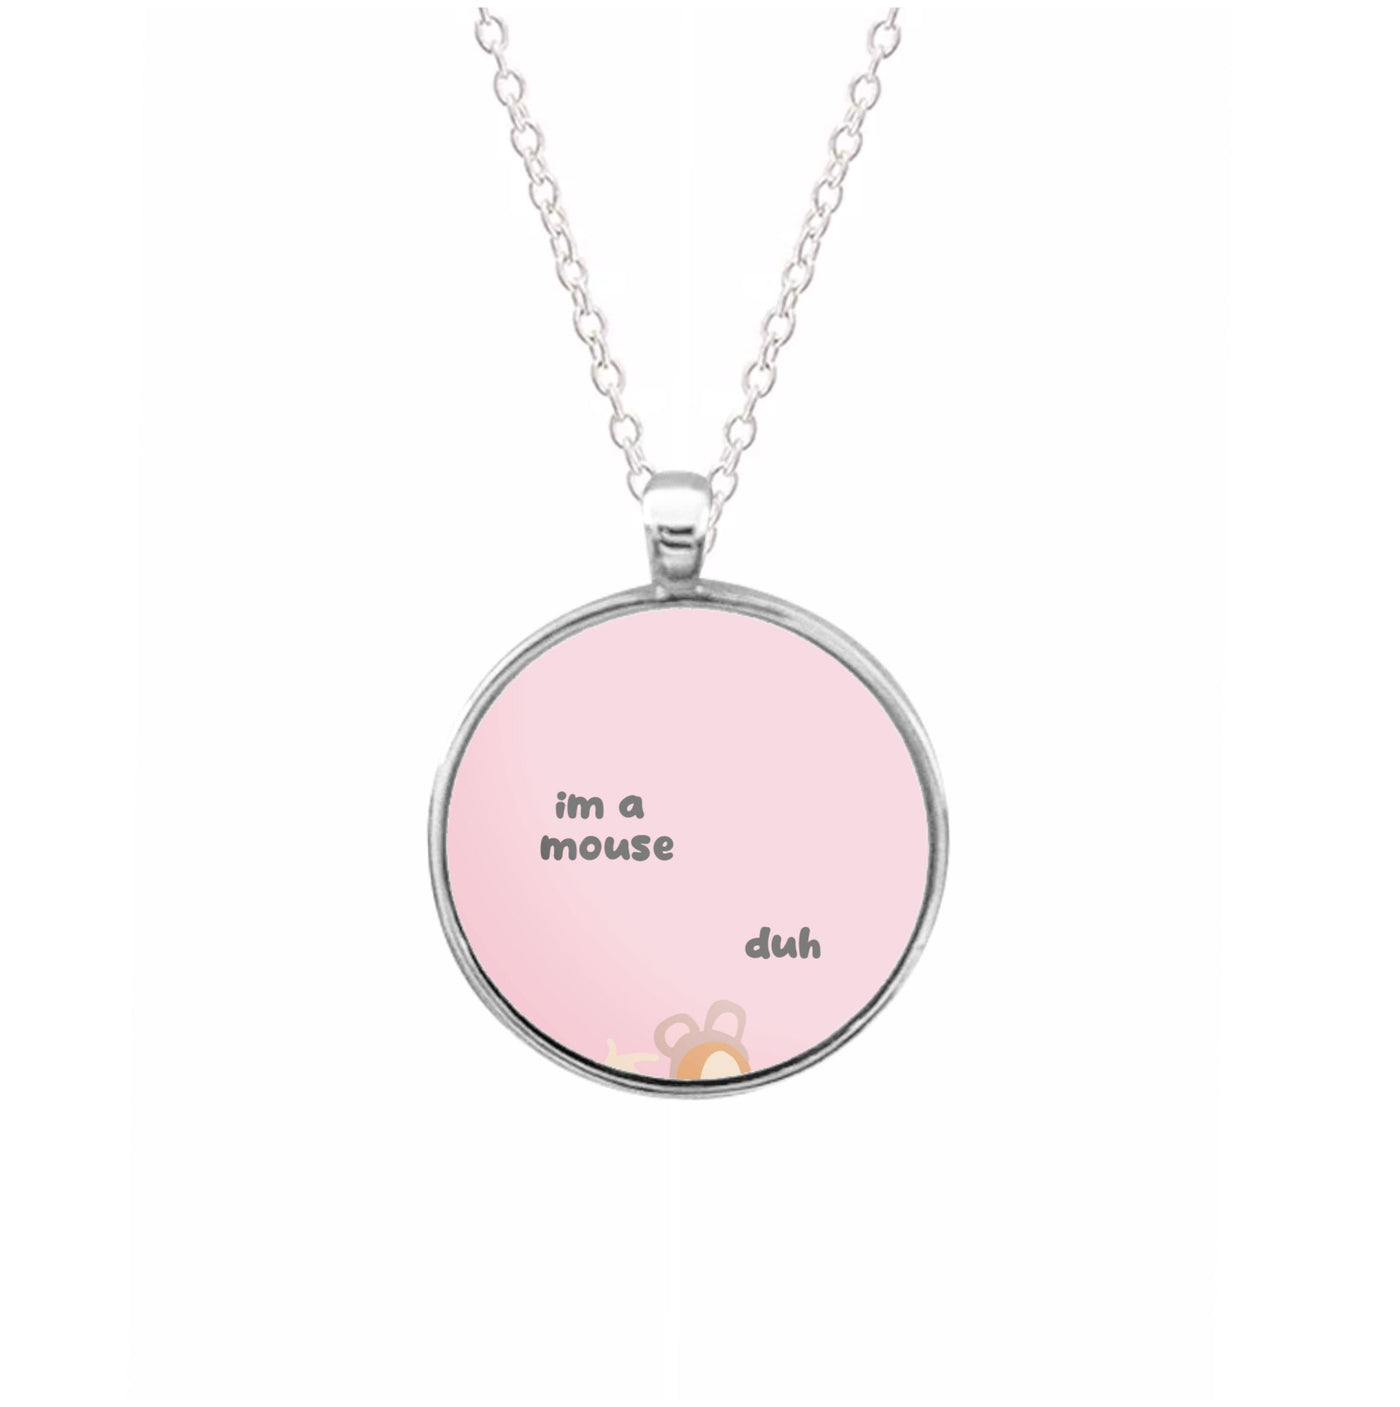 I'm a mouse Halloween - Mean Girls Necklace